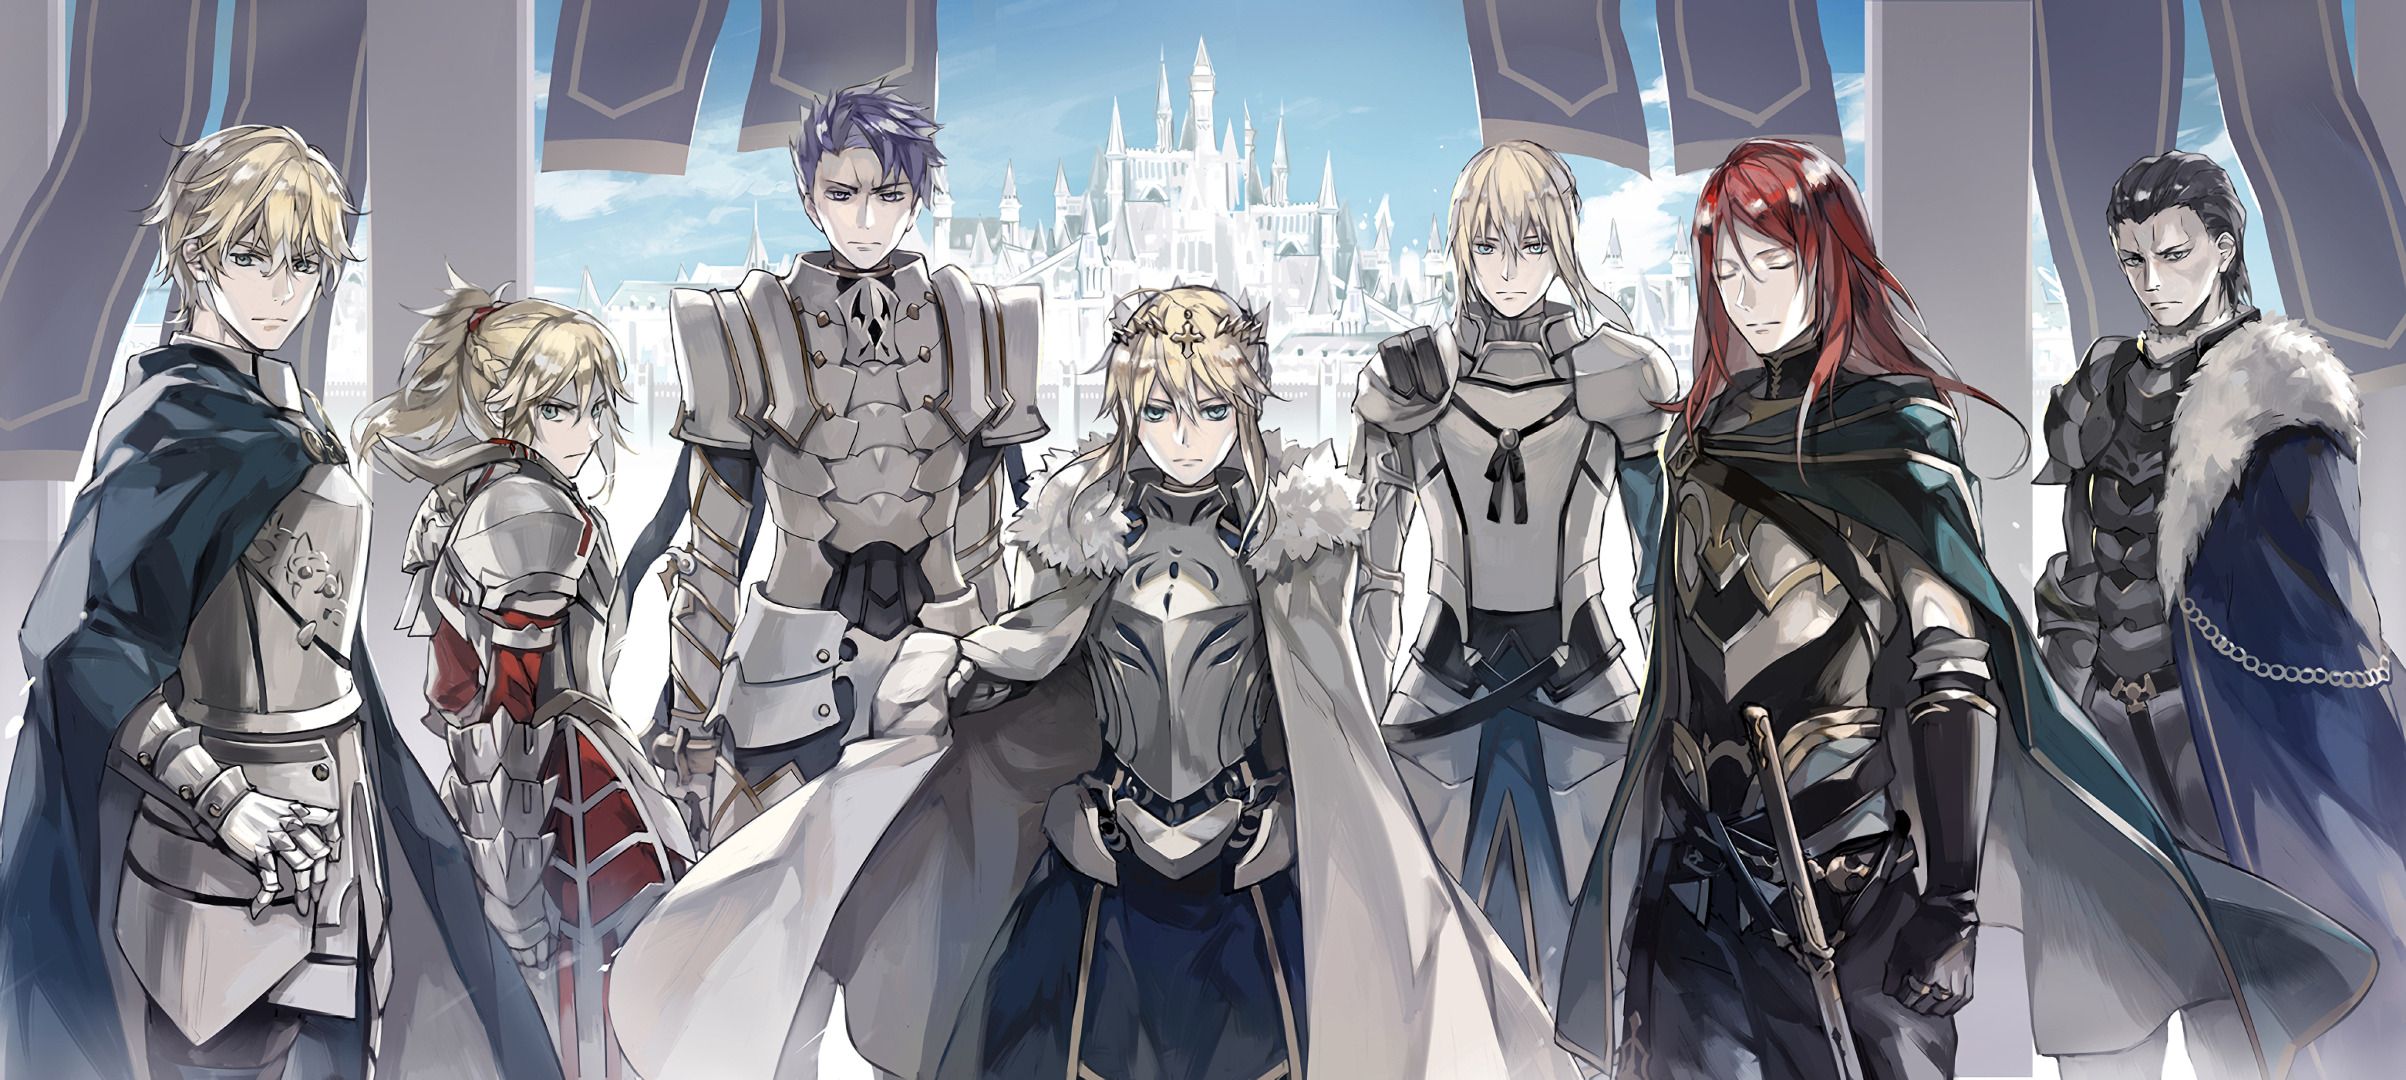 Fate/Grand Order: First Order - Anime Discussion - Anime Forums